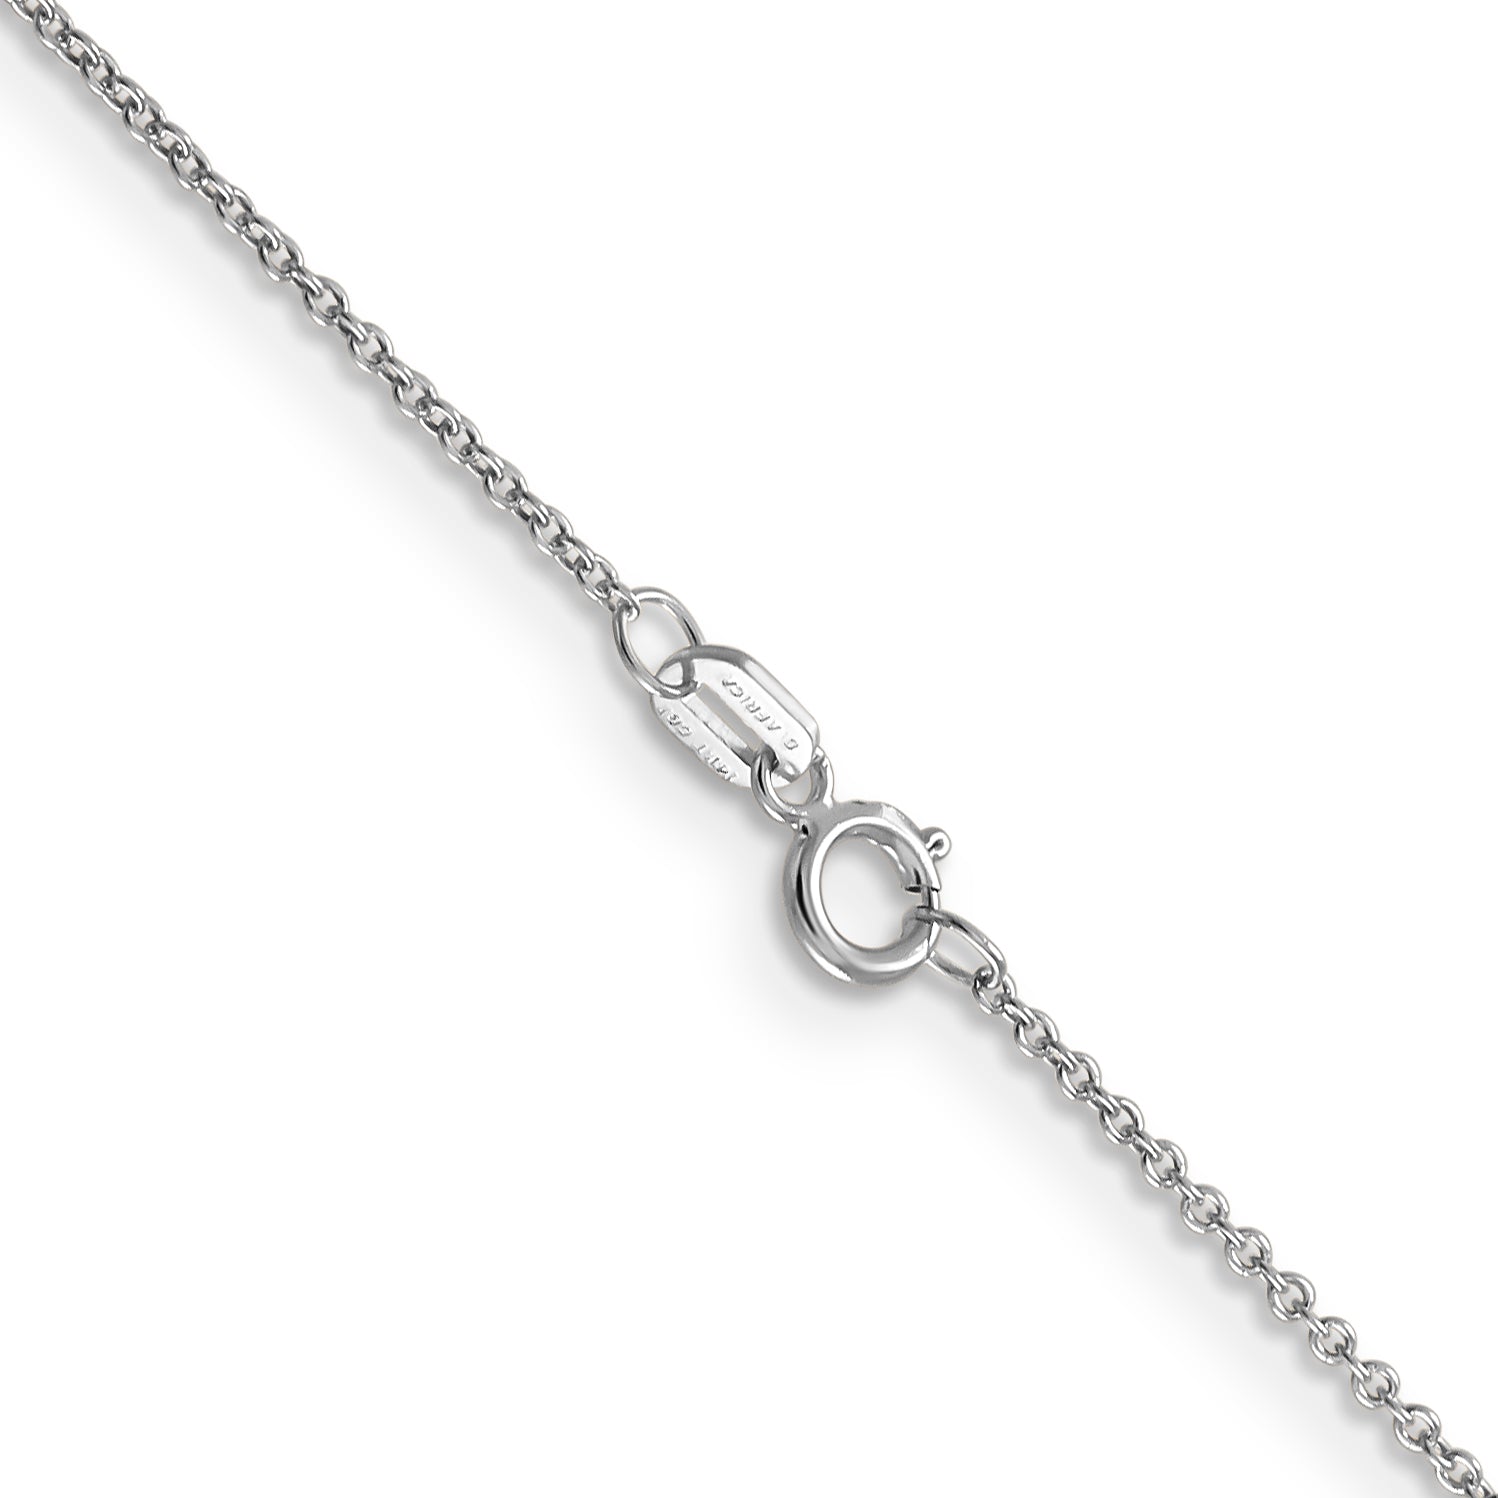 14K White Gold 14 inch .9mm Cable with Spring Ring Clasp Chain